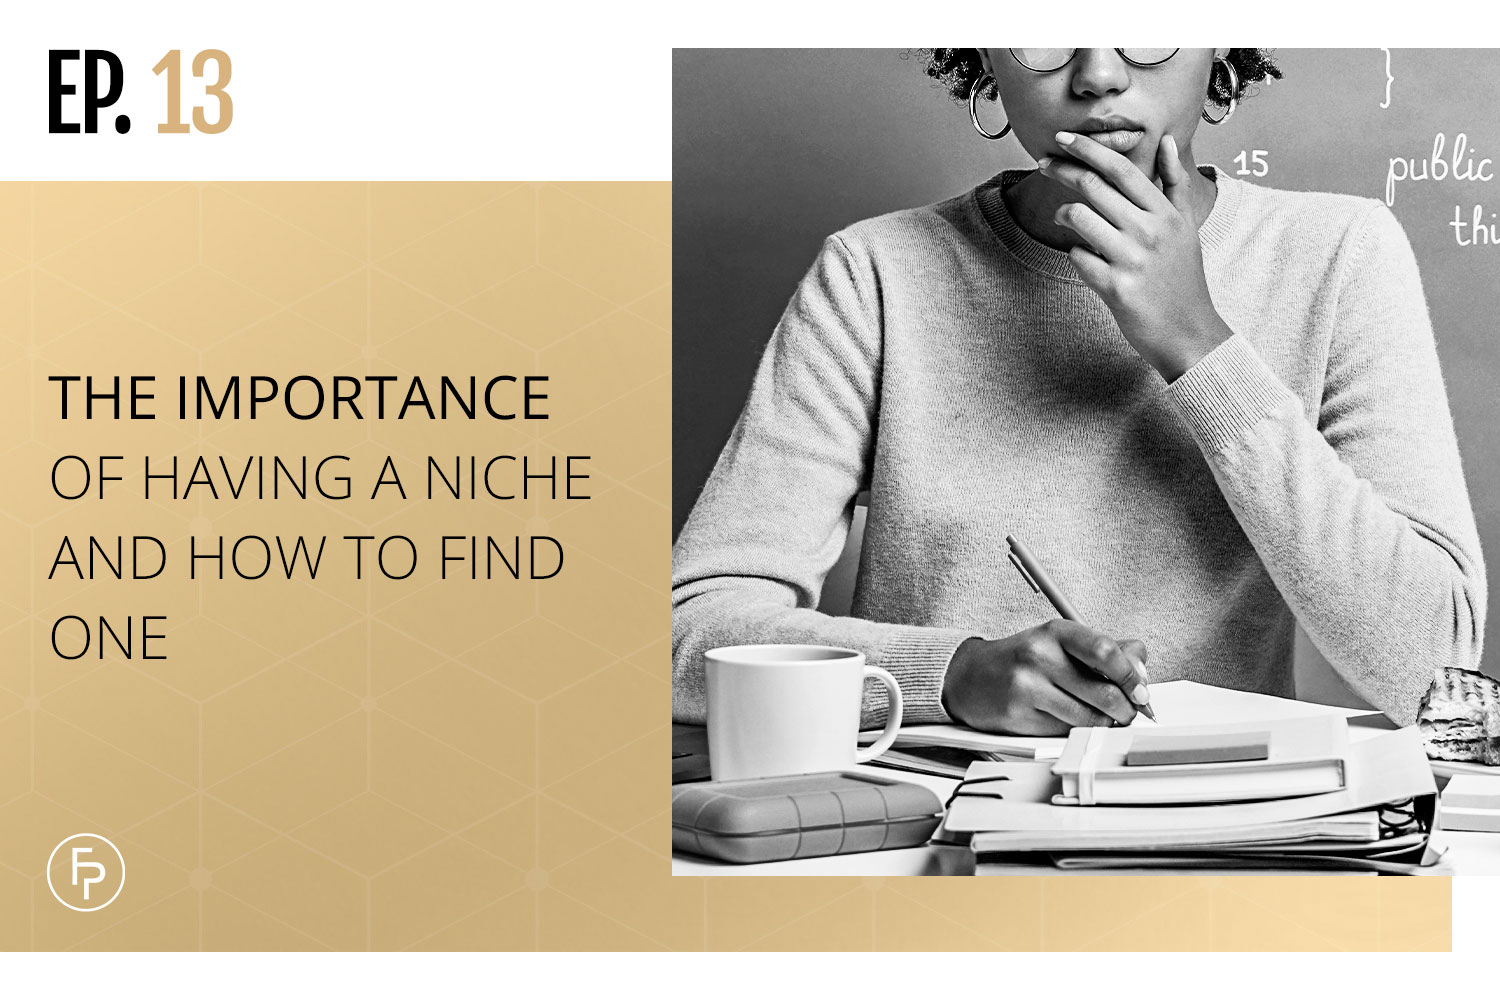 THE IMPORTANCE OF HAVING A NICHE AND HOW TO FIND ONE: EP 13